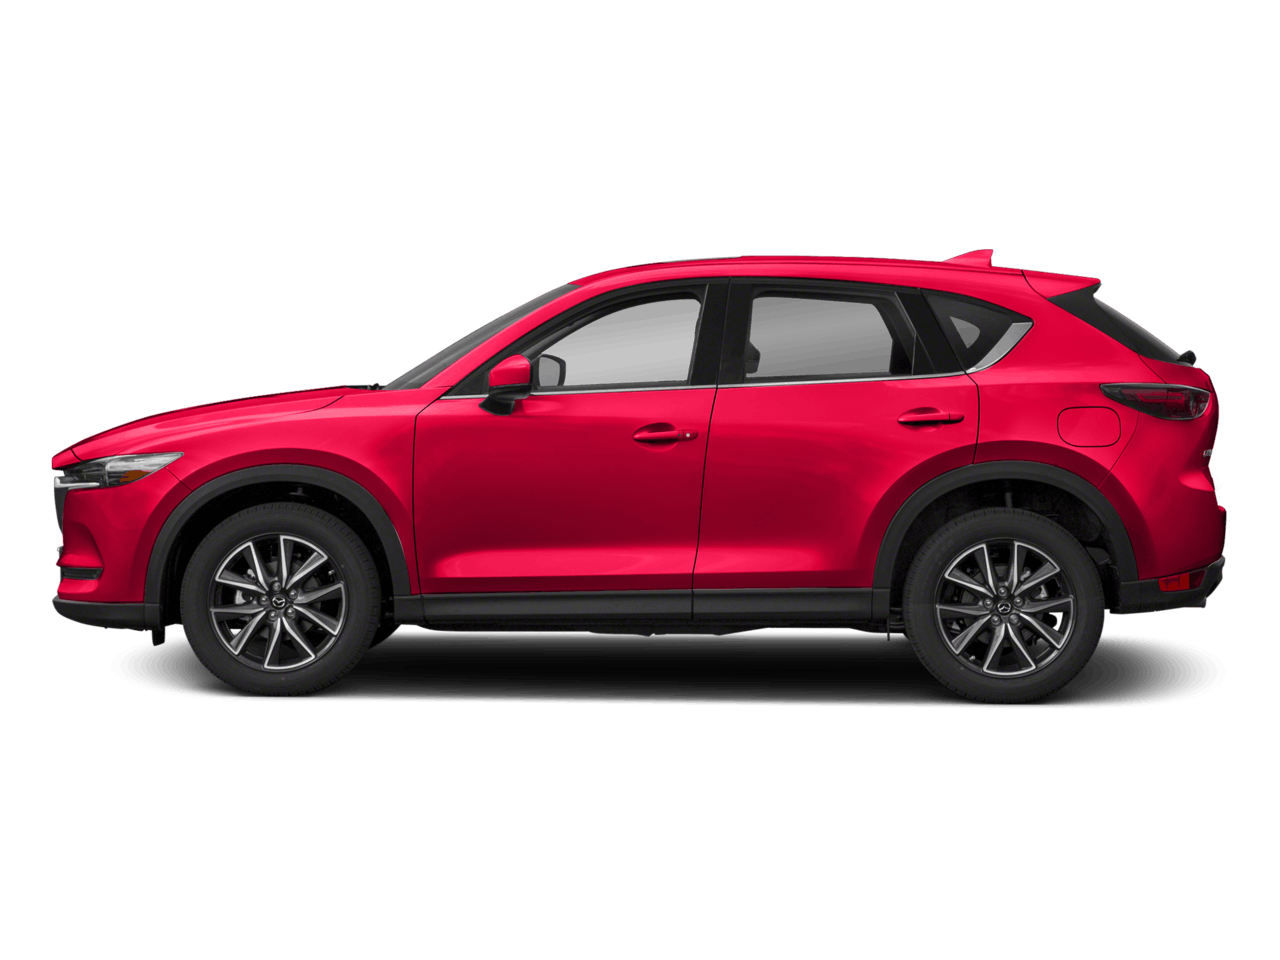 Used Toyota Cx-5 Models in Tumwater, WA